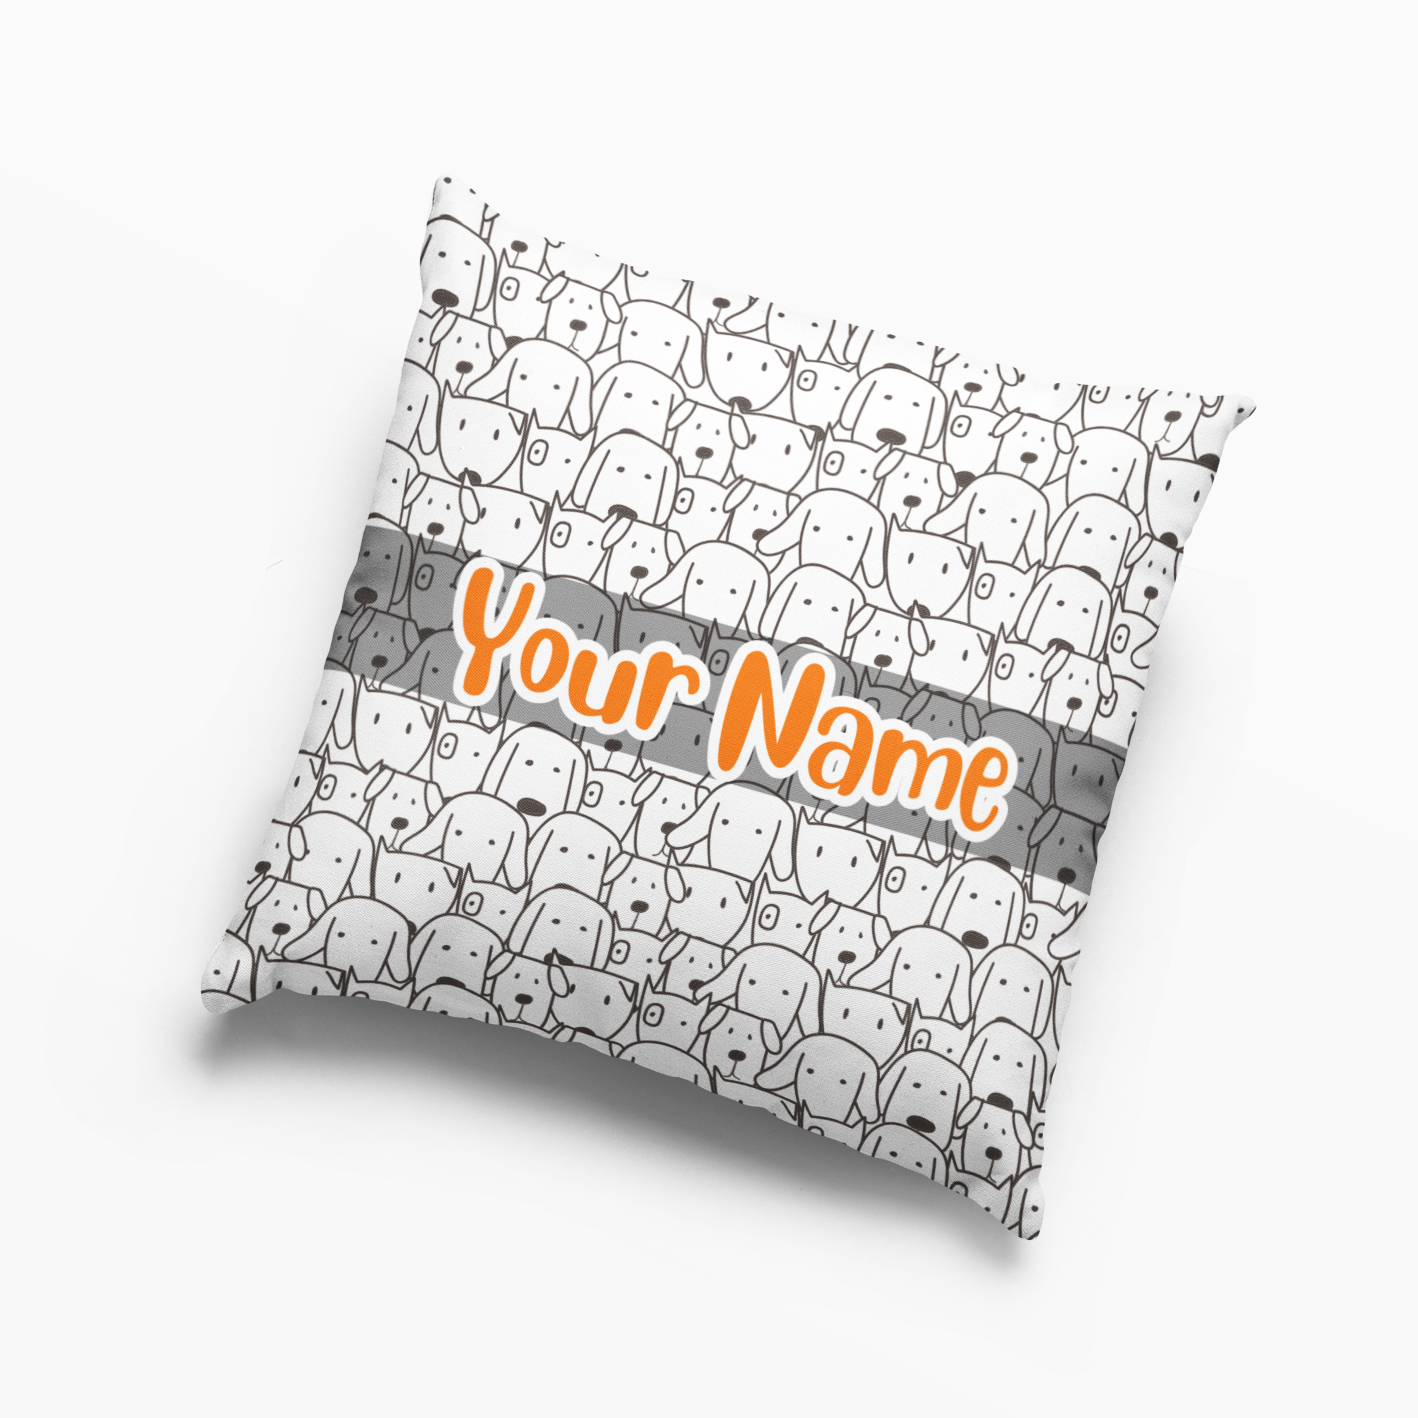 Cute Dog Pillow personalized Pillow with Your name #1 Pillow Case